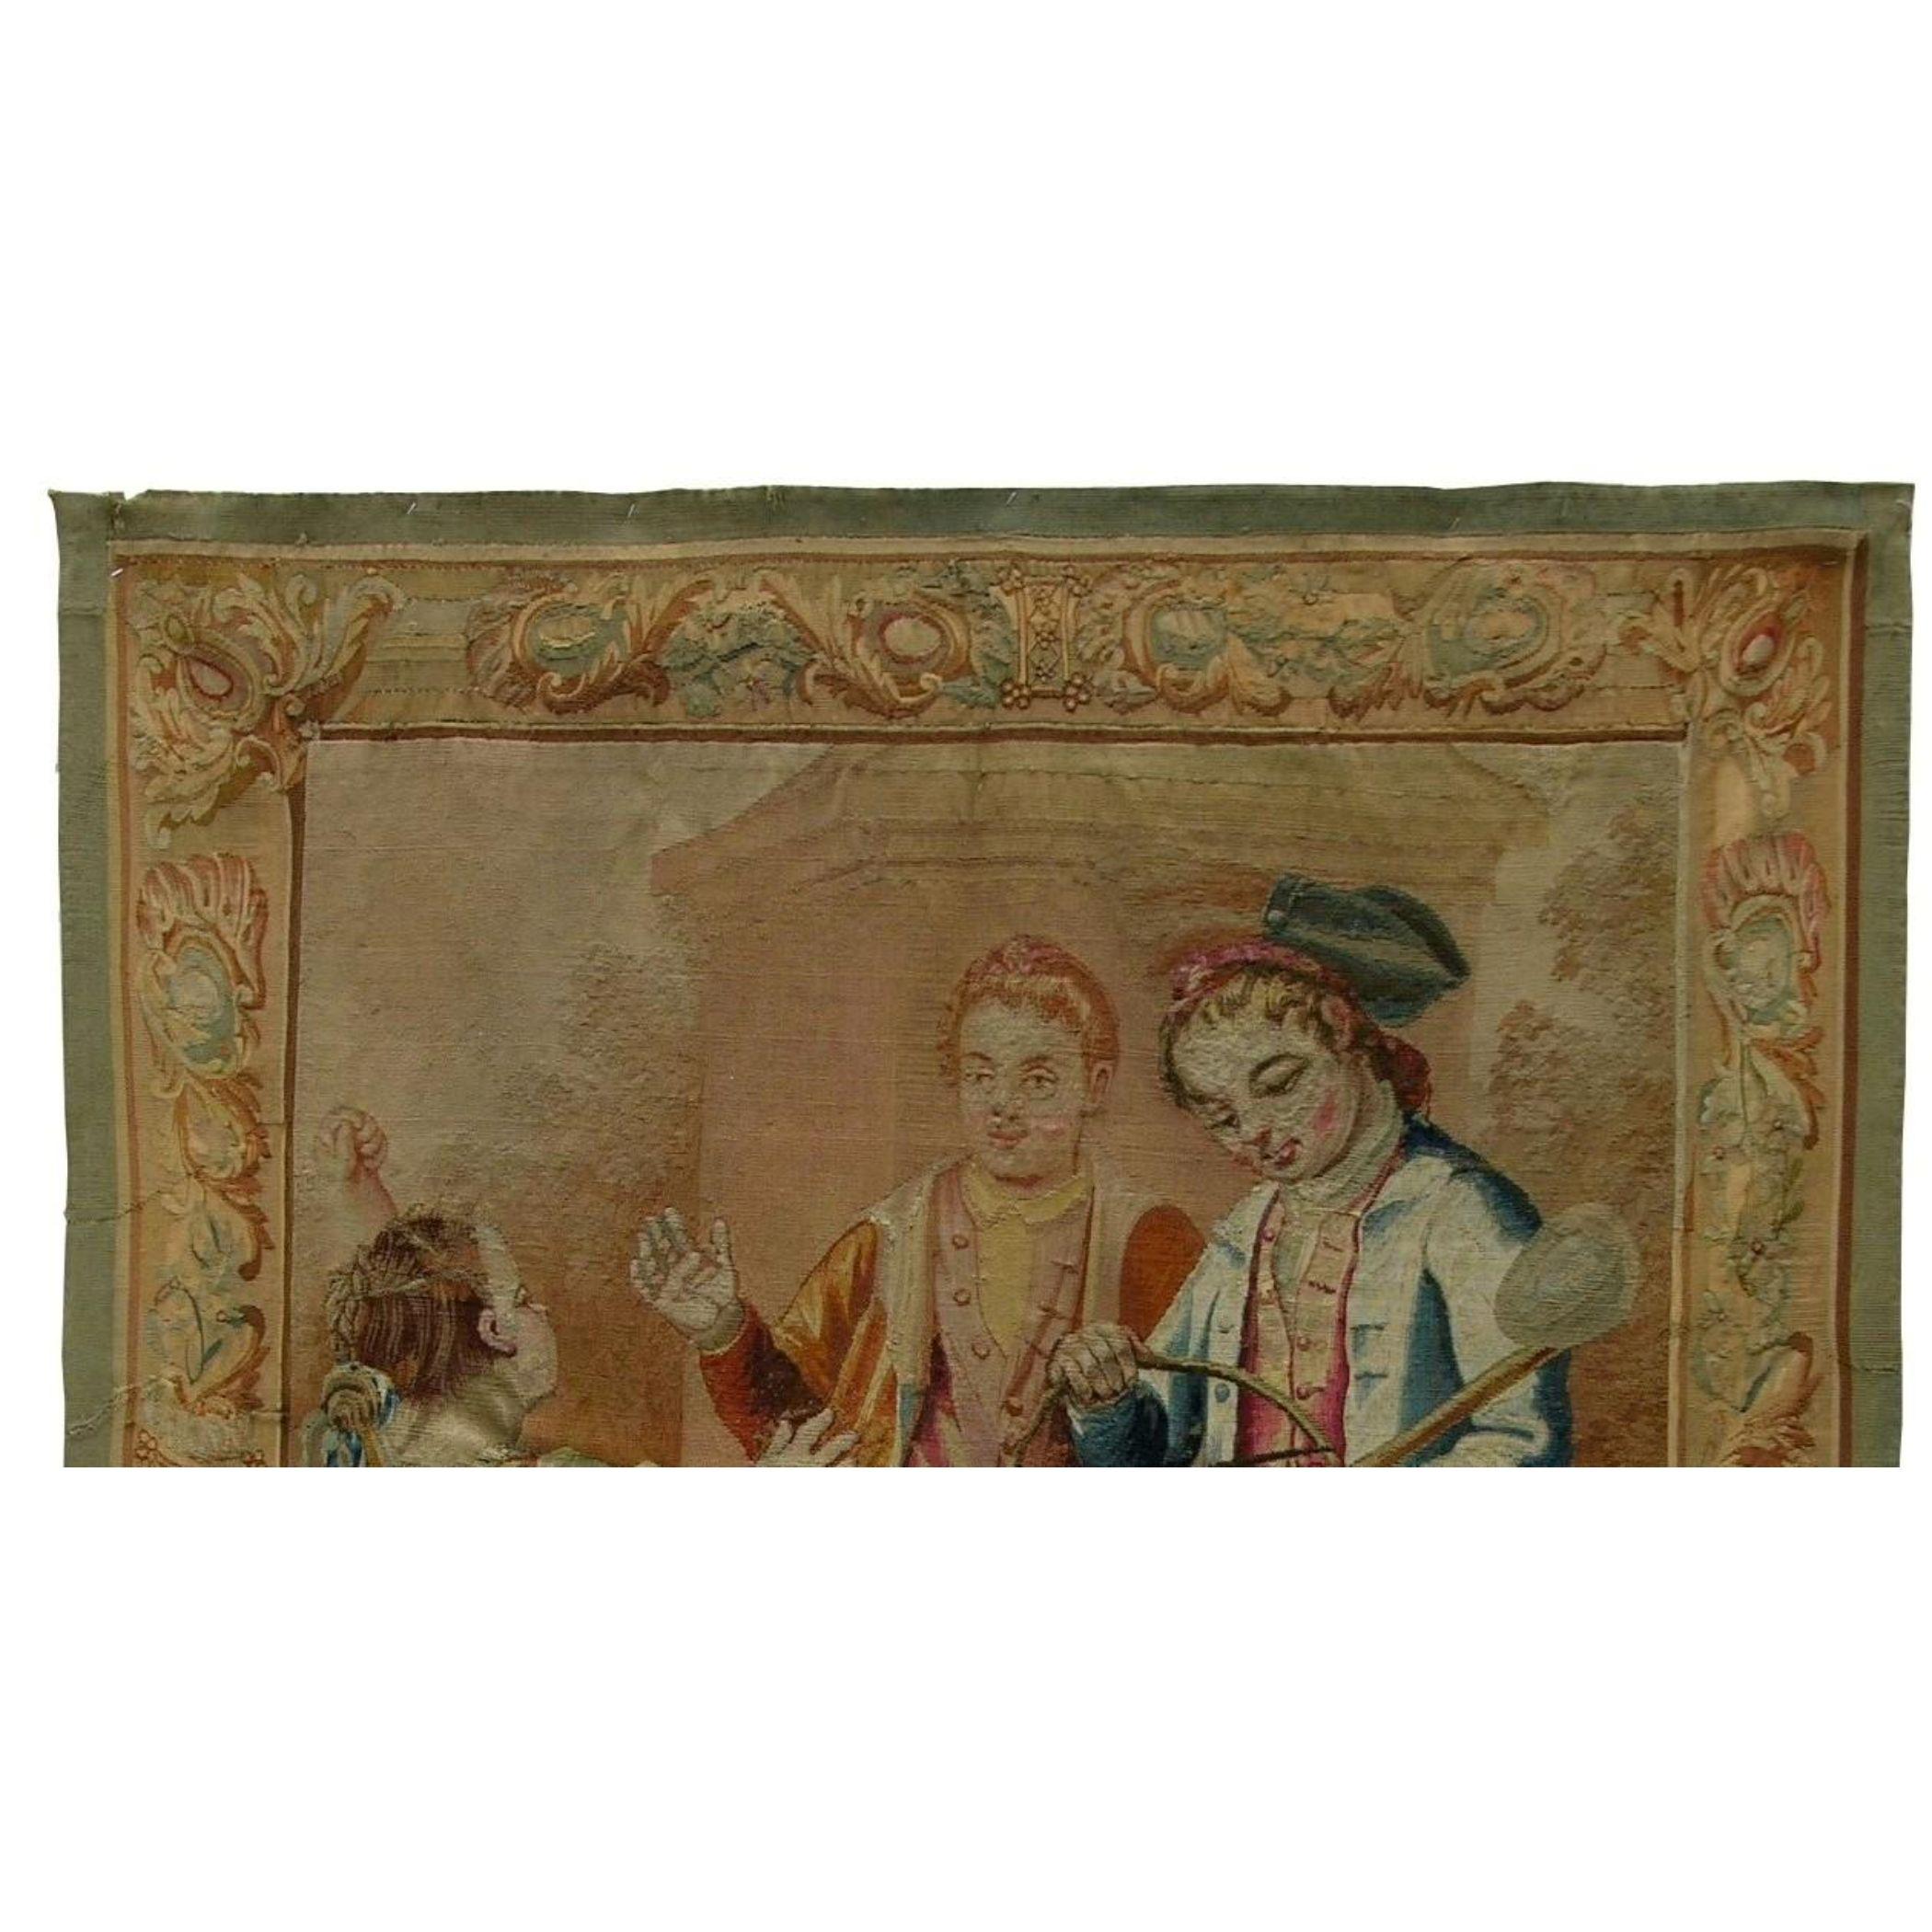 Unknown 18th Century French Tapestry 5'2